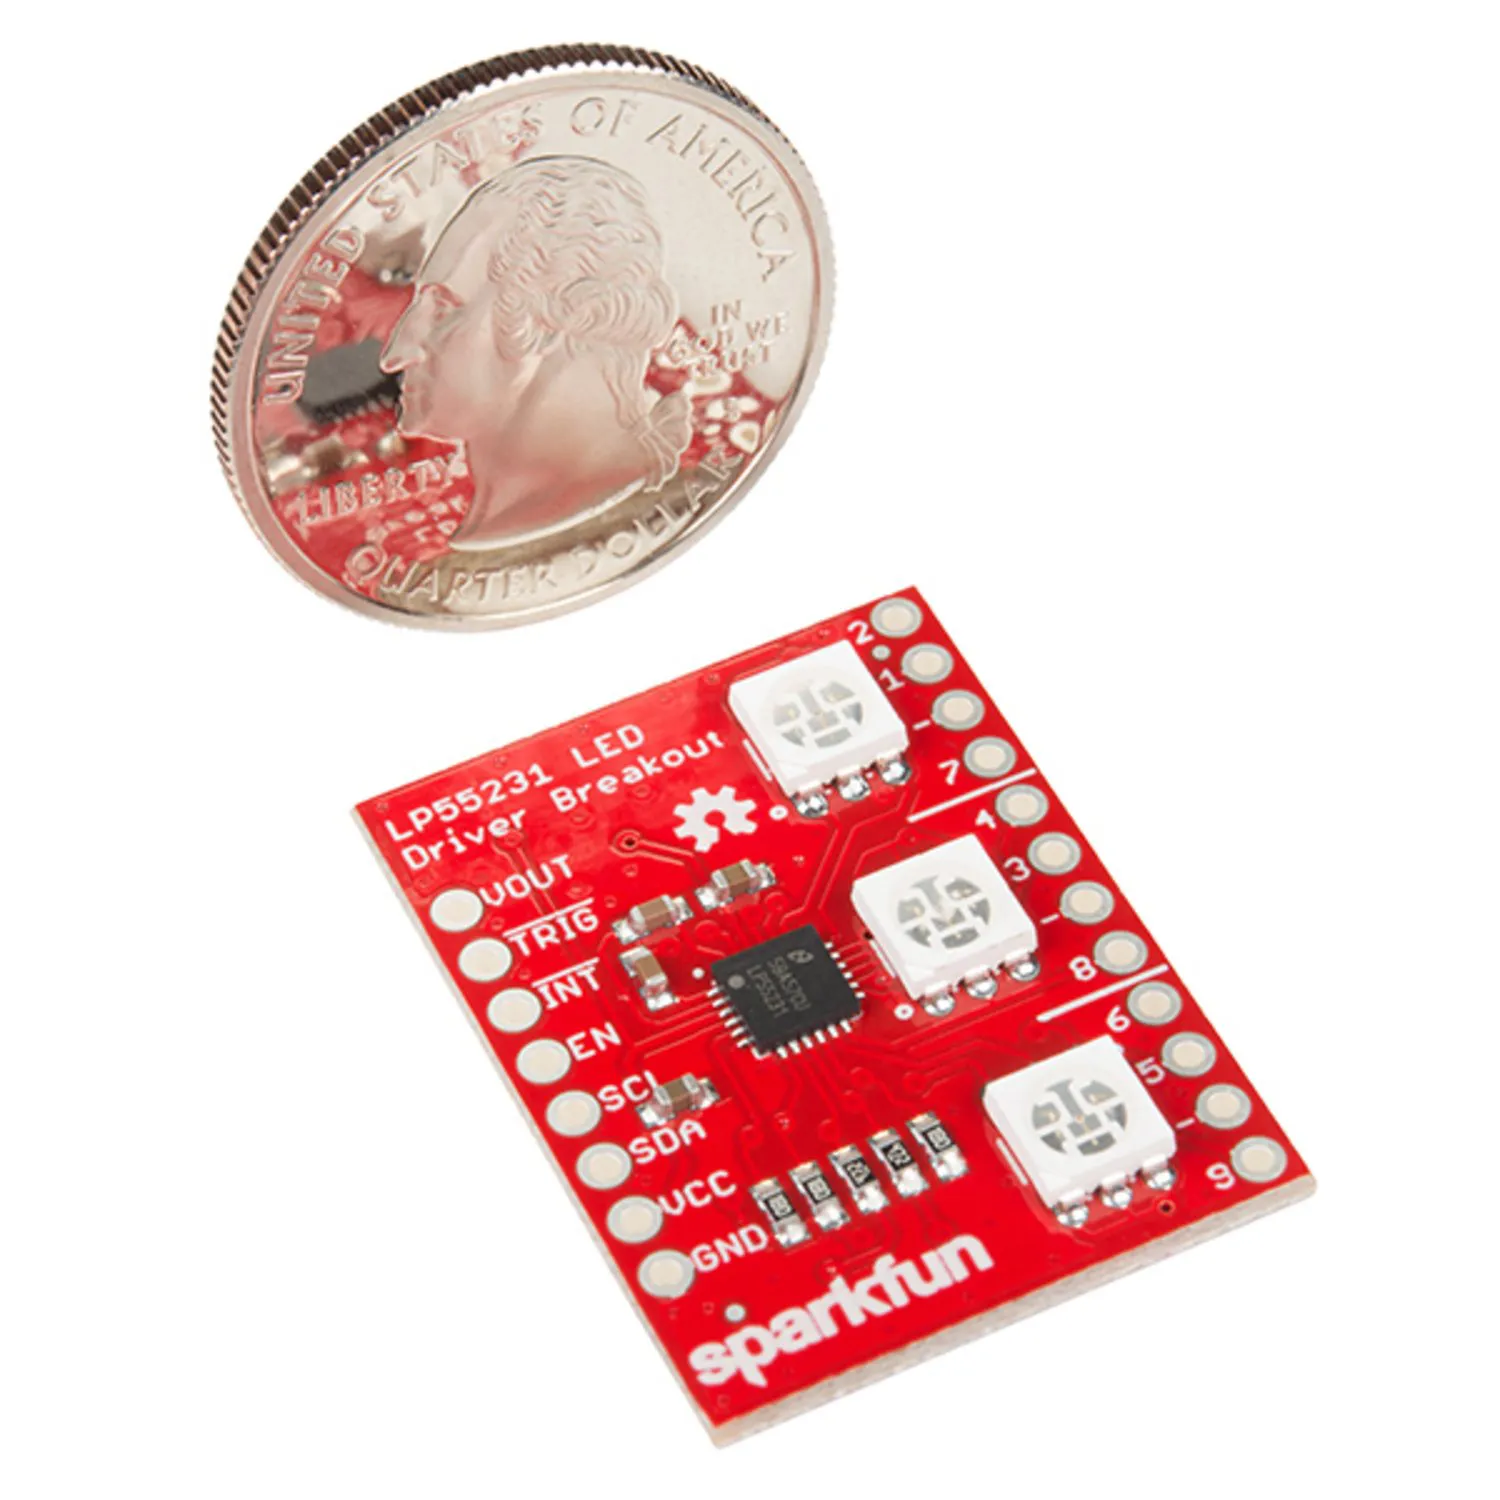 Photo of SparkFun LED Driver Breakout - LP55231 